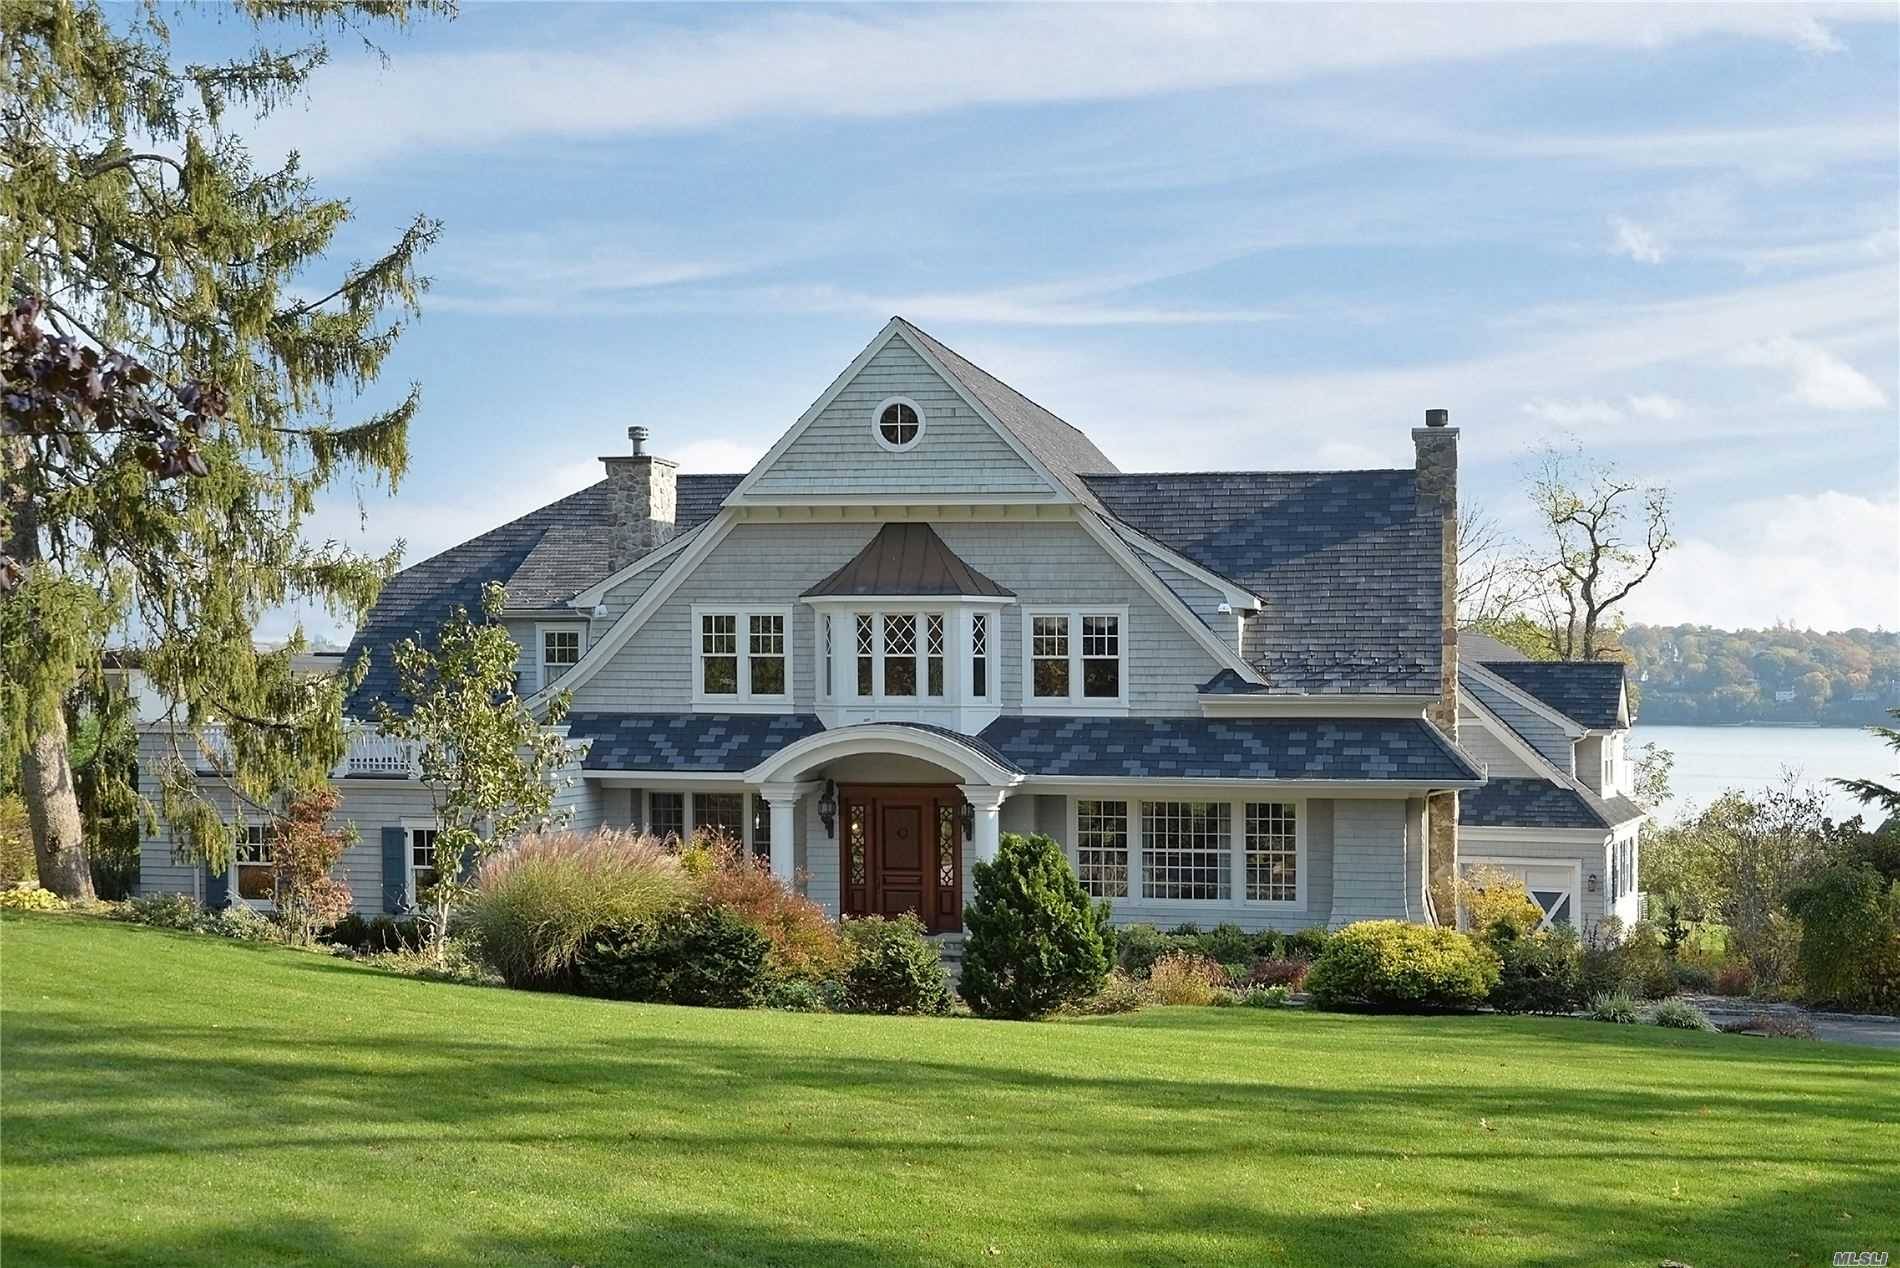 Offering Tantalizing Water Views, This Magnificent Custom Built 6 Bedroom Shingle Style Home With Pool Was Designed To Capitalize On Its Prime Location While Providing A Floor Plan And Amenities ...